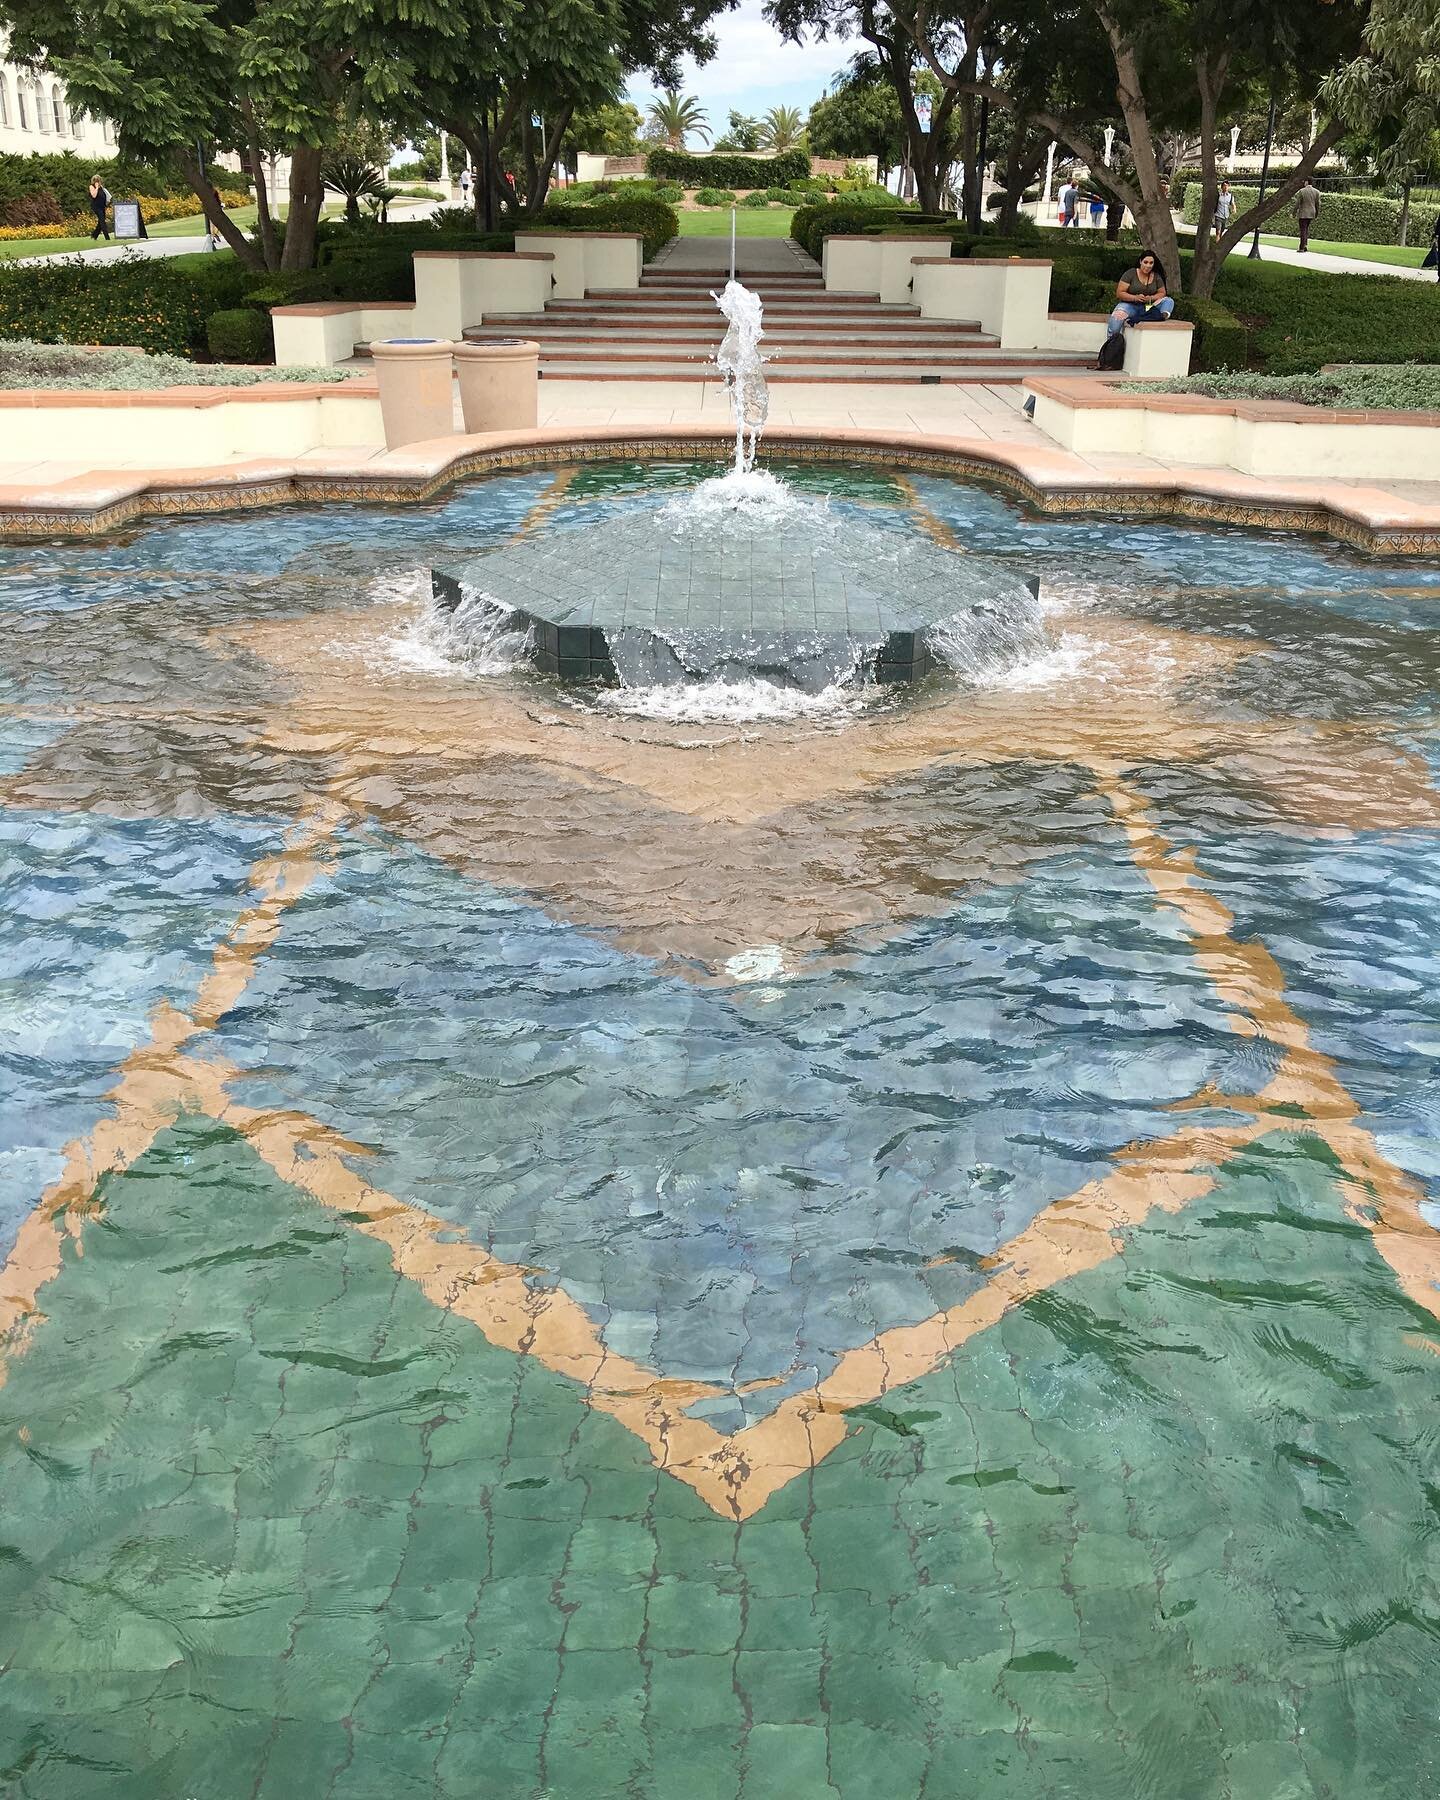 Great meeting spots on college campuses? Always, the fountain. #collegelife #campusvisits